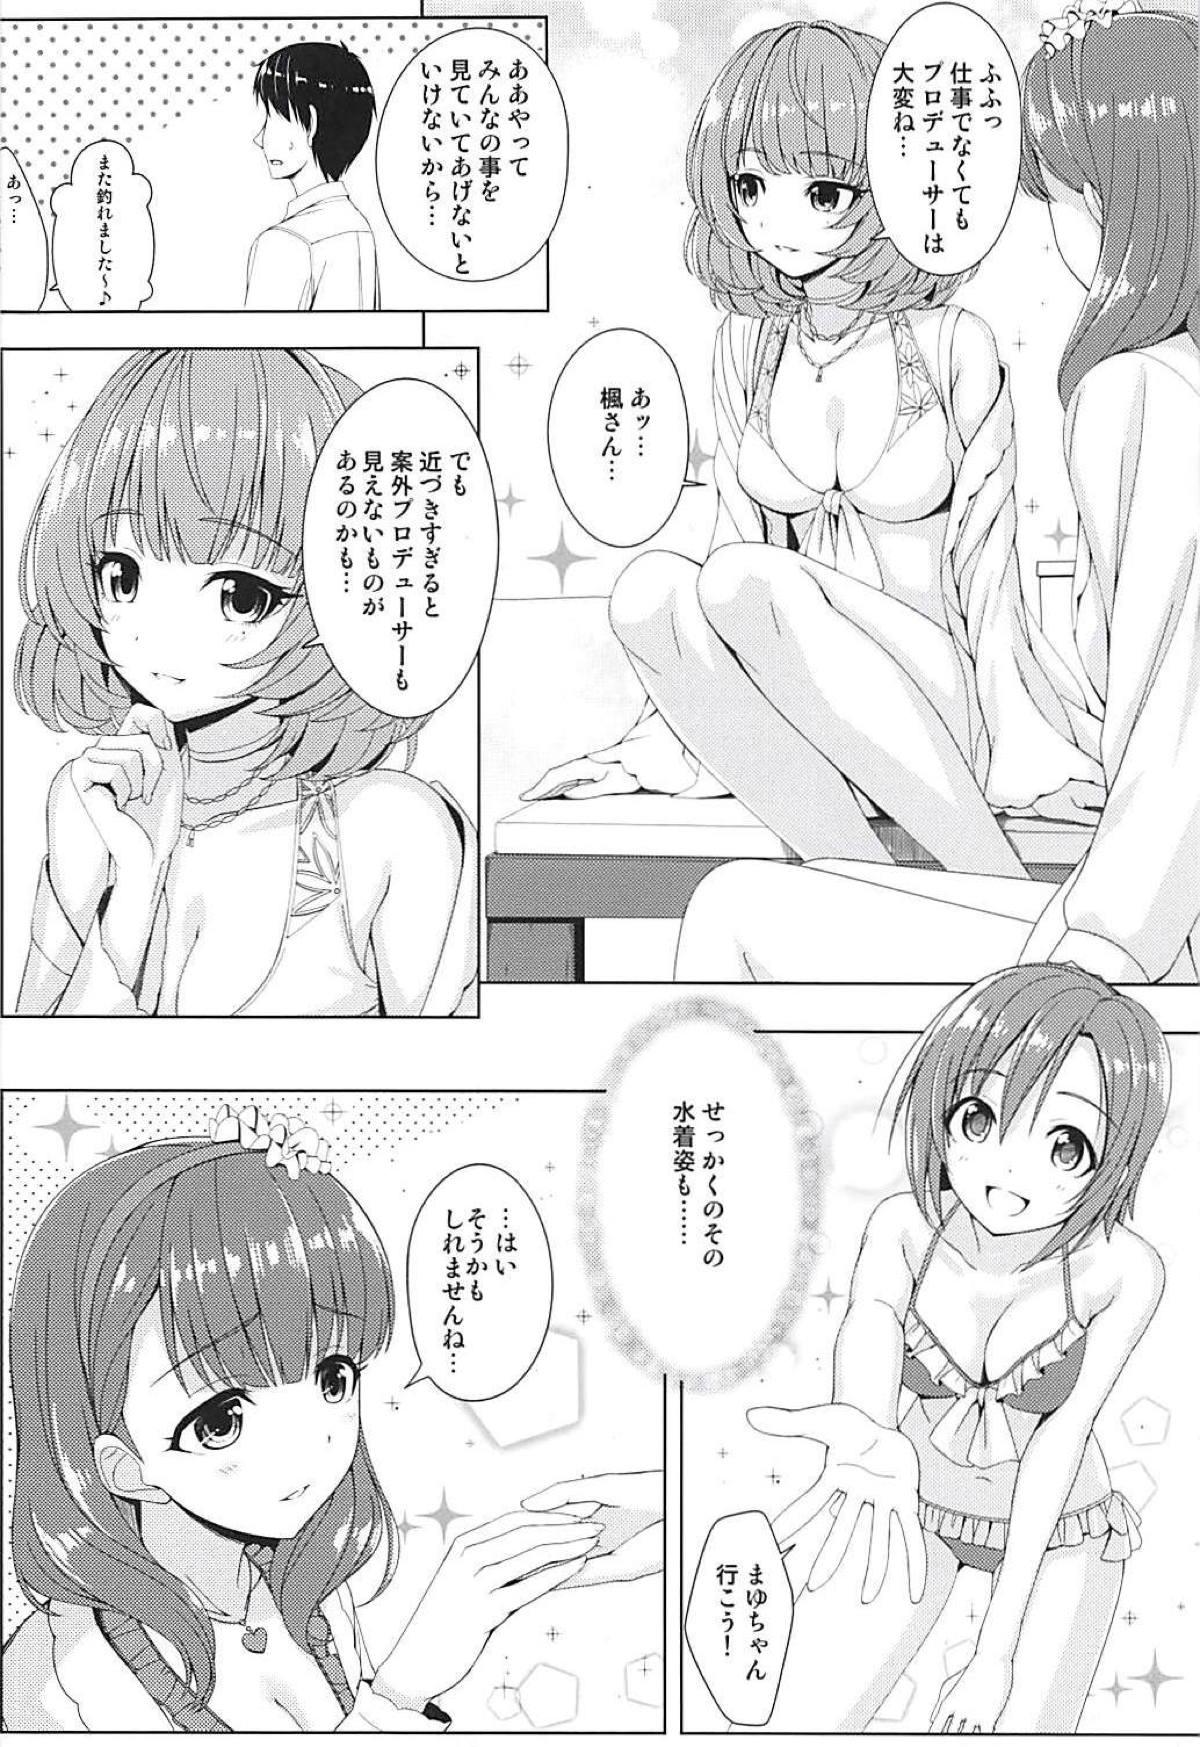 Doggystyle Porn BAD COMMUNICATION? vol. 23 - The idolmaster Shaved - Page 9